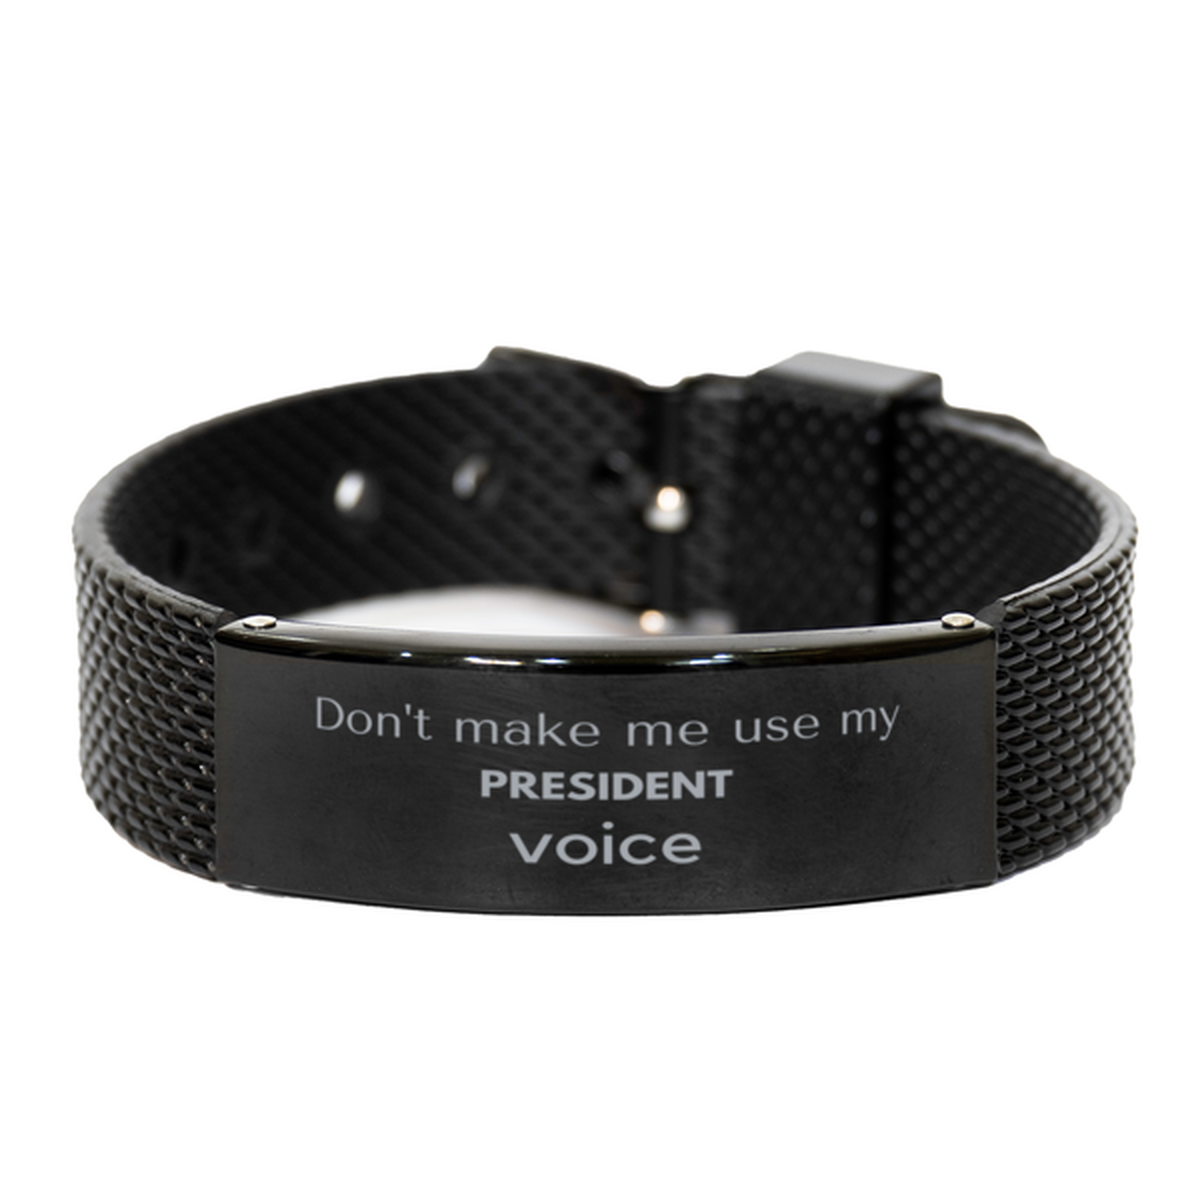 Don't make me use my President voice, Sarcasm President Gifts, Christmas President Black Shark Mesh Bracelet Birthday Unique Gifts For President Coworkers, Men, Women, Colleague, Friends